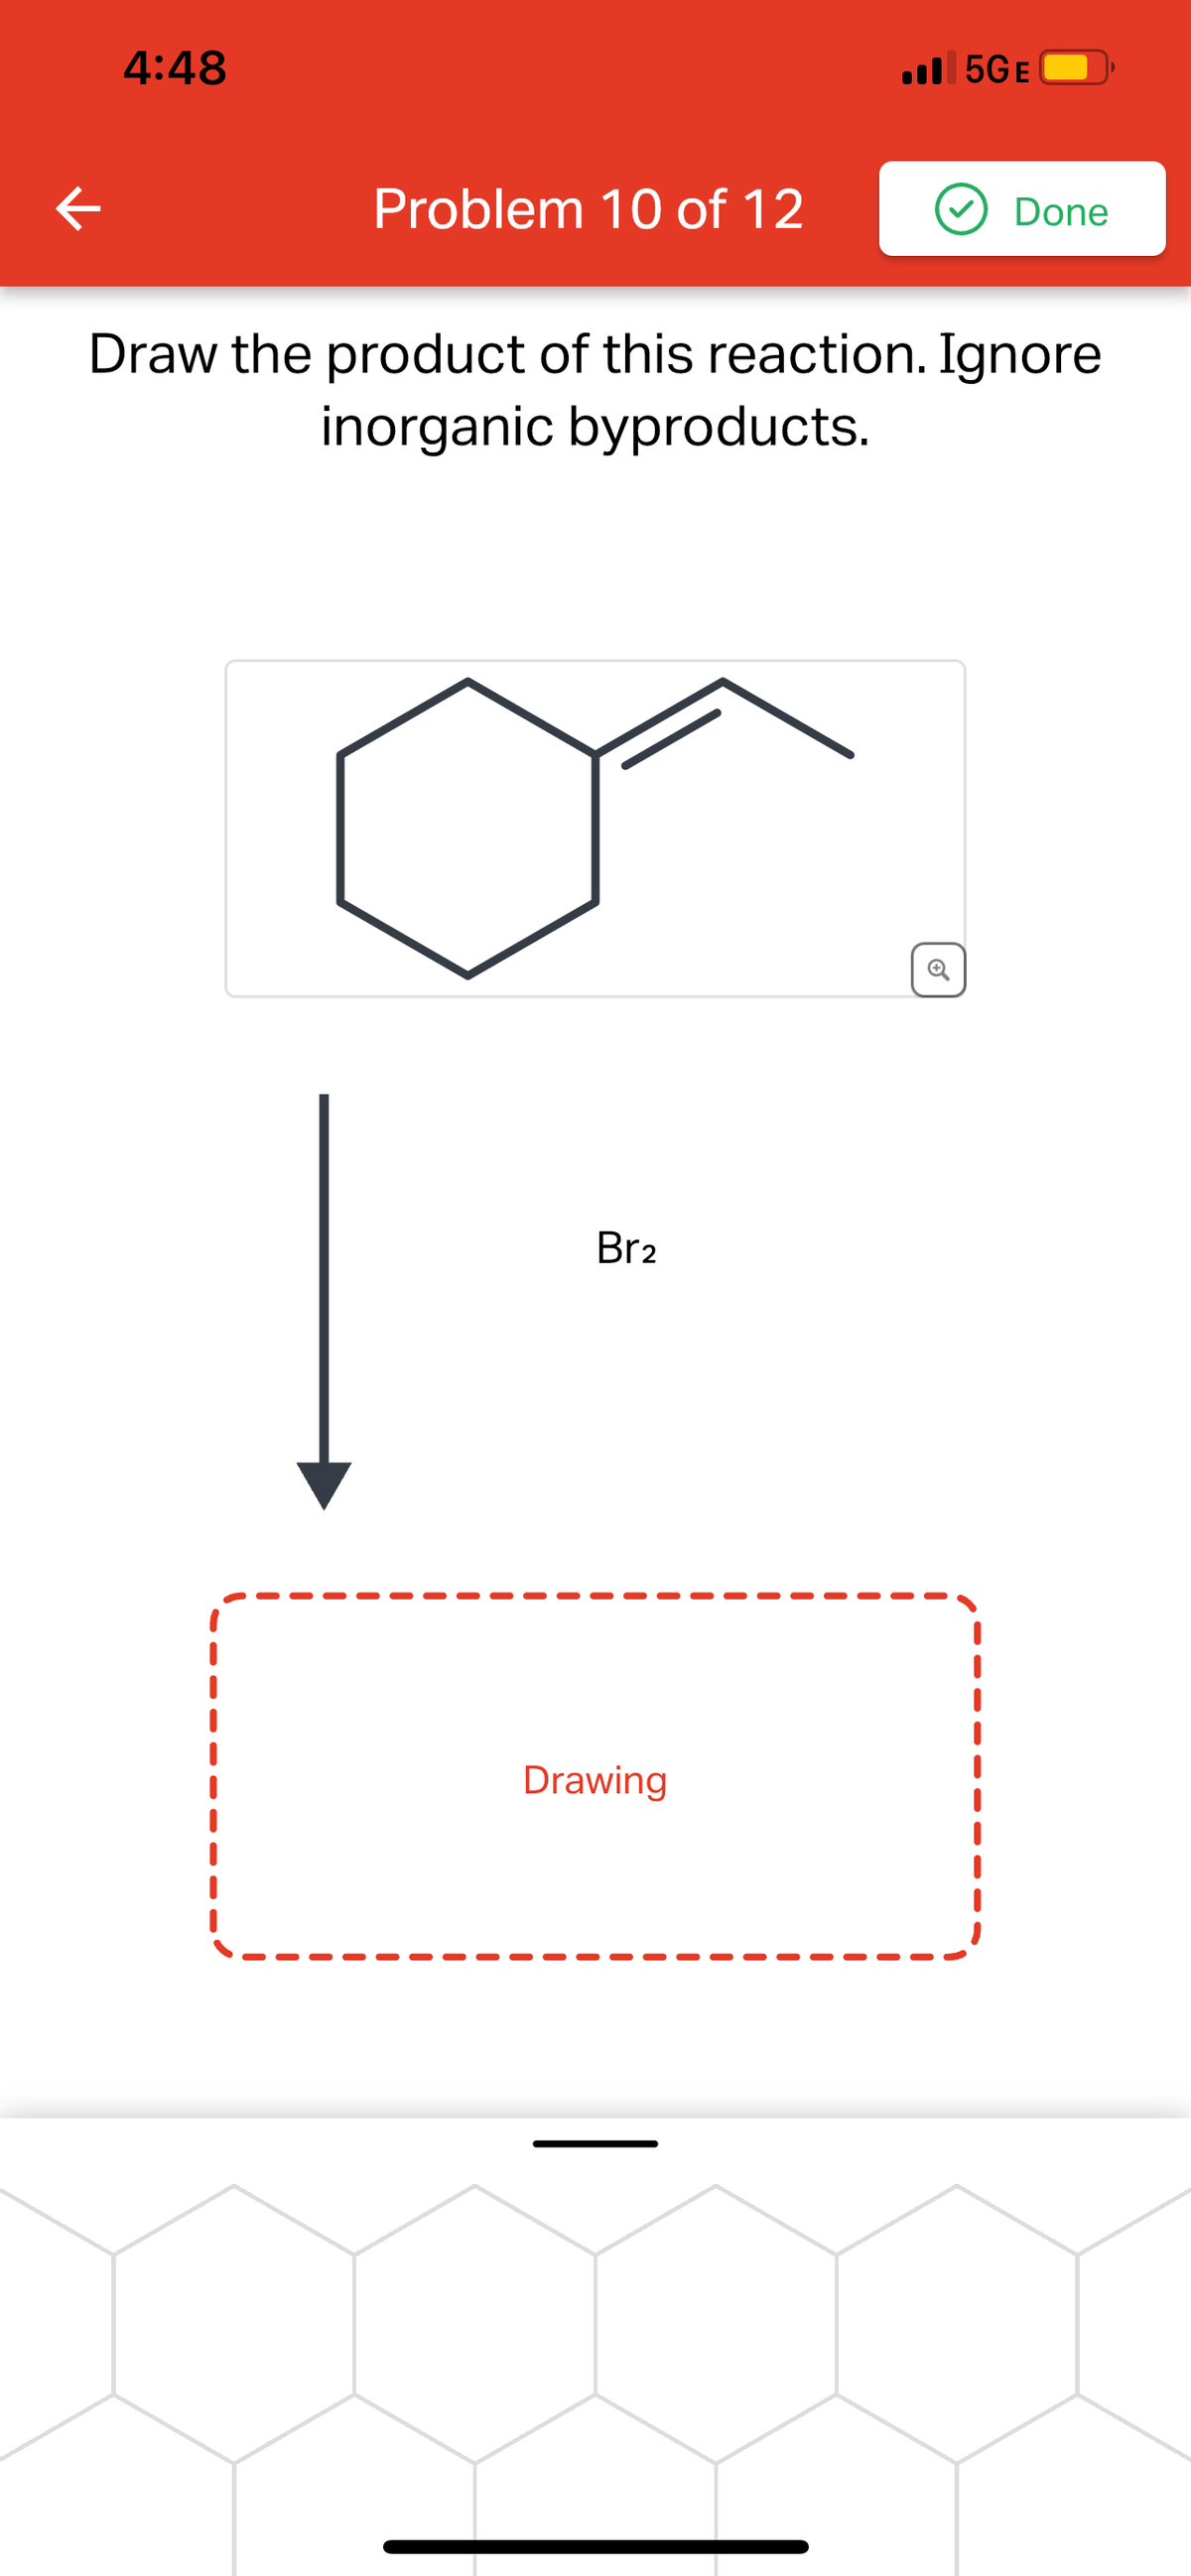 ←
4:48
Problem 10 of 12
Br2
5GE
Draw the product of this reaction. Ignore
inorganic byproducts.
Drawing
Done